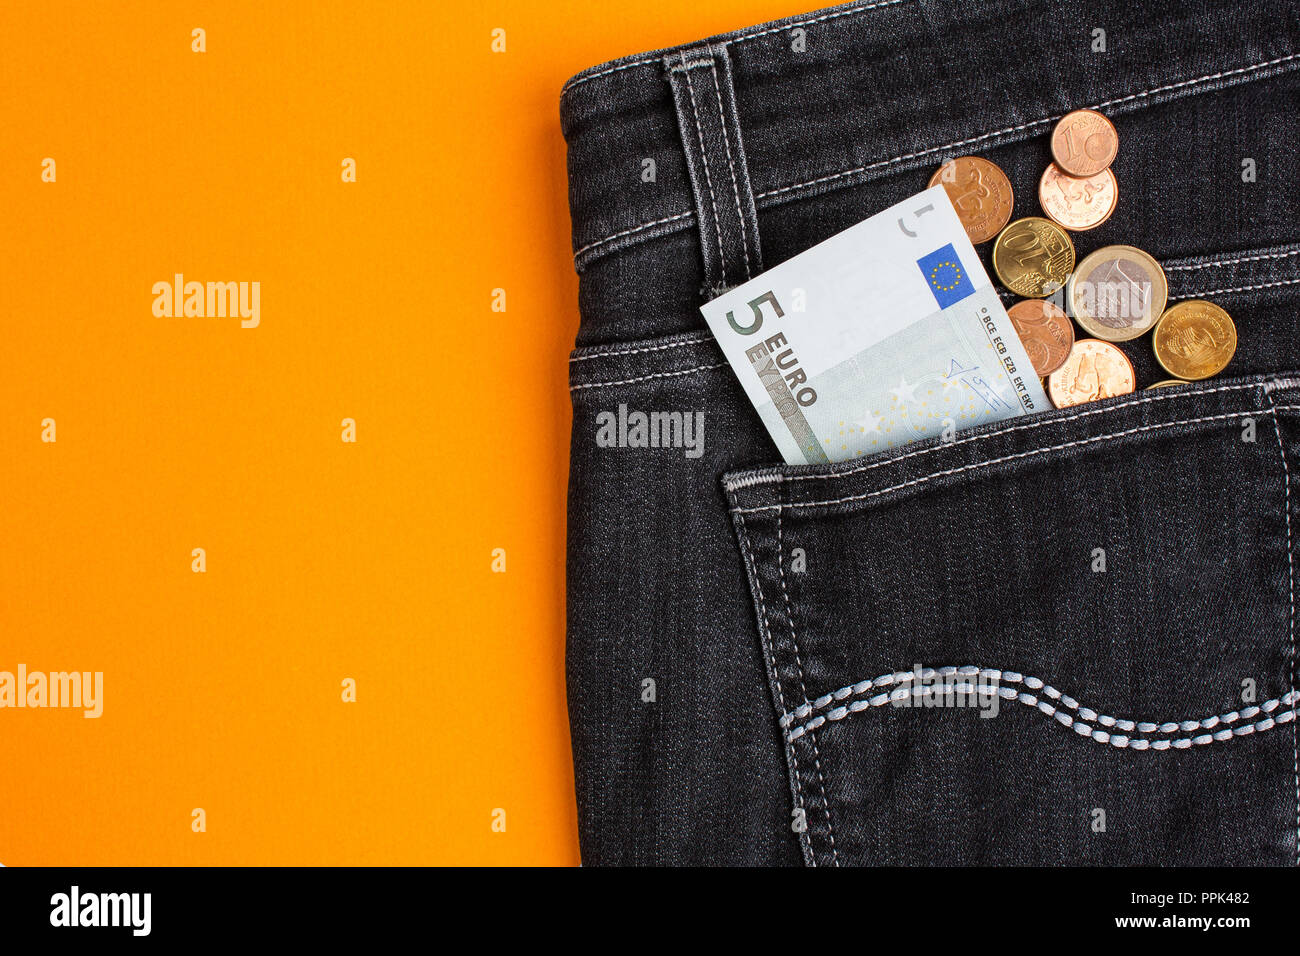 Euro banknote and coins in black jeans back pocket on orange background Stock Photo